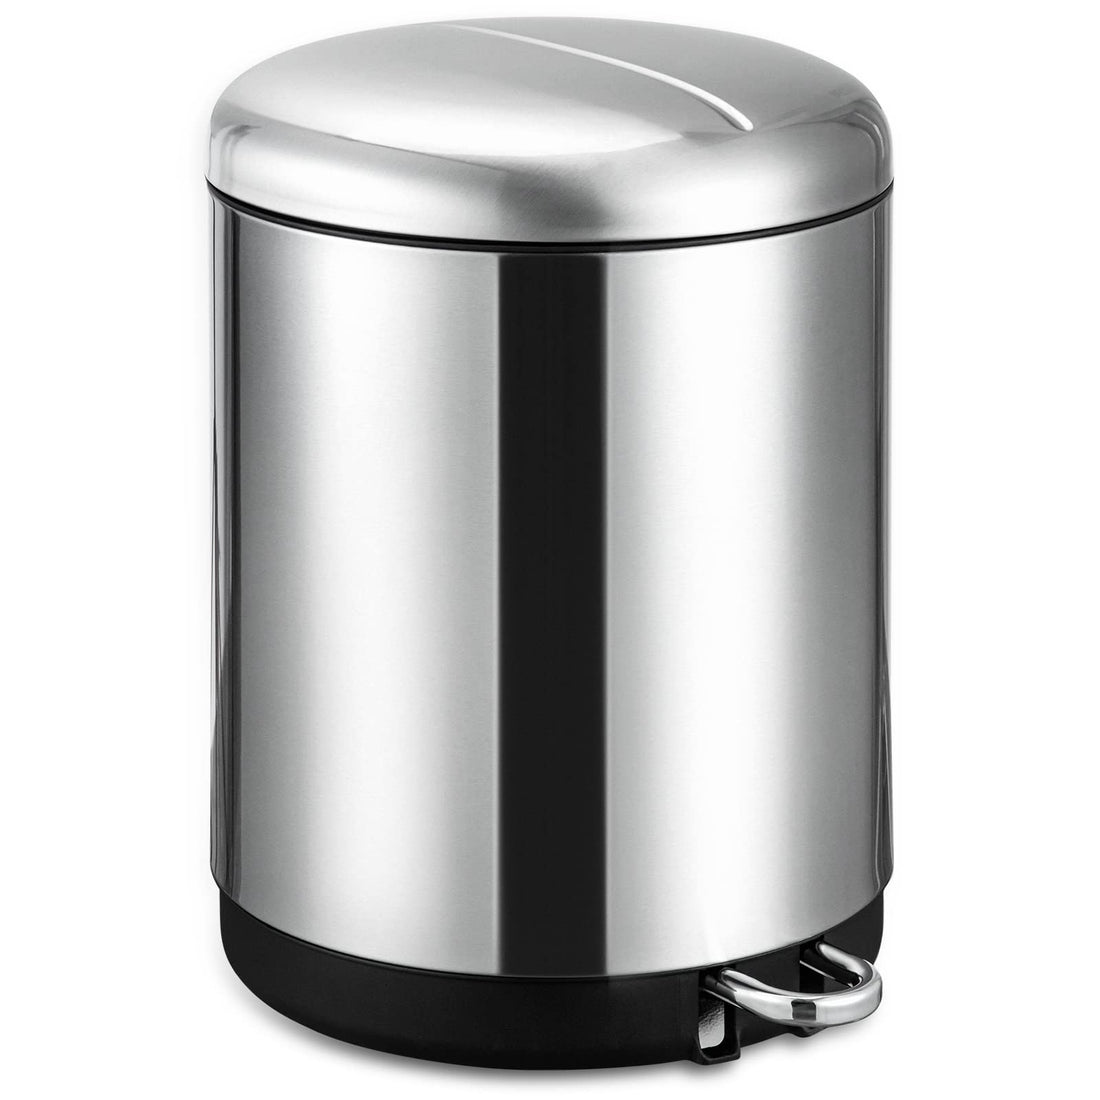 2x15L Stainless Steel Trash Can, Soft Close Lid, Pedal, Silver